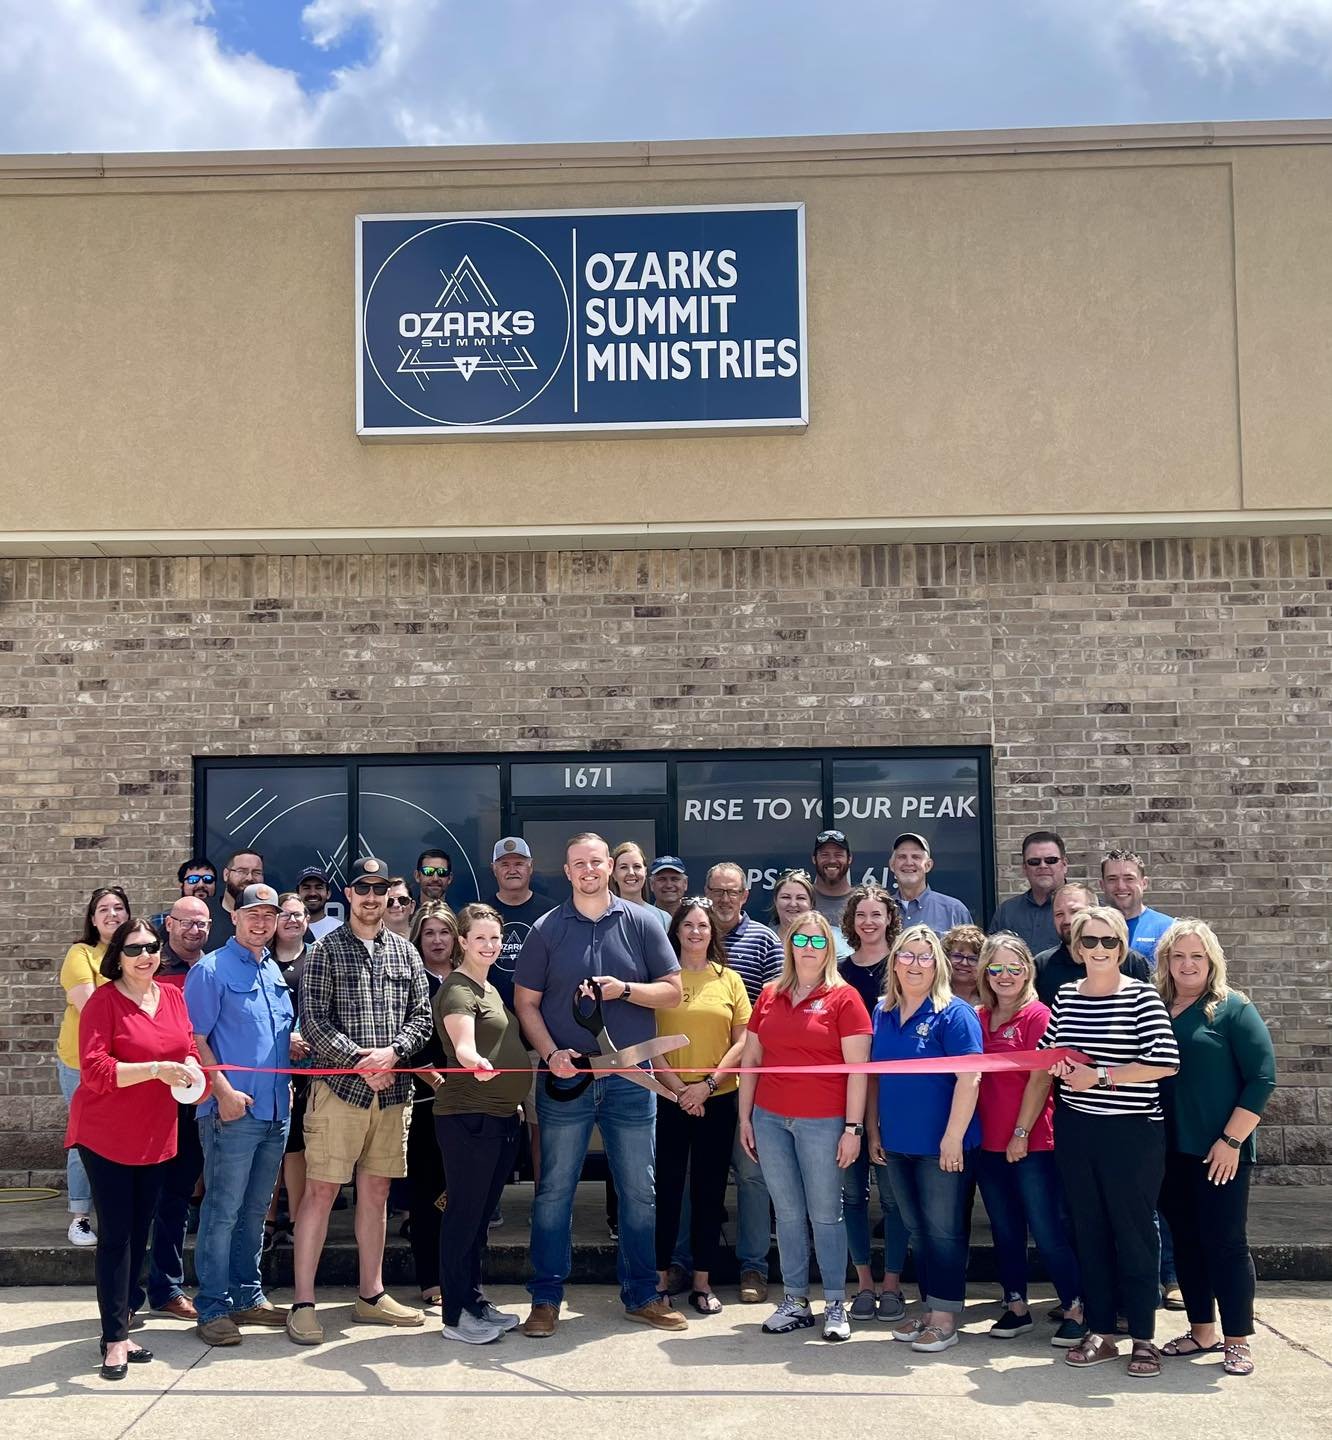 We officially had our opening and boy was it grand! 🎉

We are so thankful for God&rsquo;s goodness and faithfulness in getting us to this point. He drives our mission and purpose every day. 

A huge shout out to the West Plains Chamber of Commerce, 